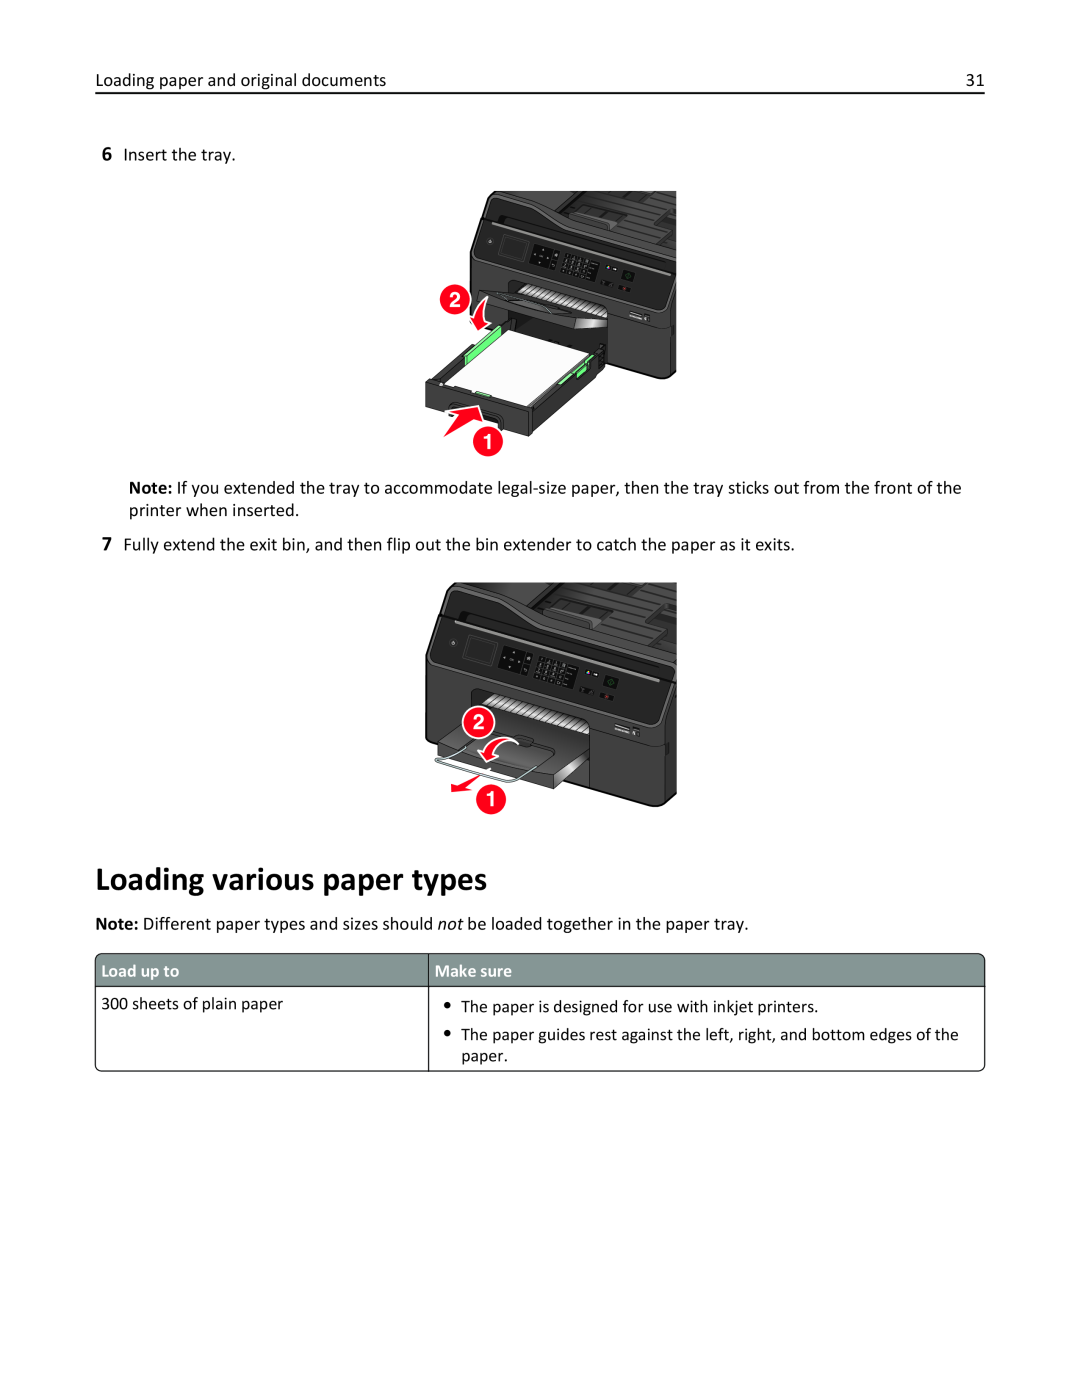 Lexmark PRO4000C, 90P3000 manual Loading various paper types, Load up to, Make sure 